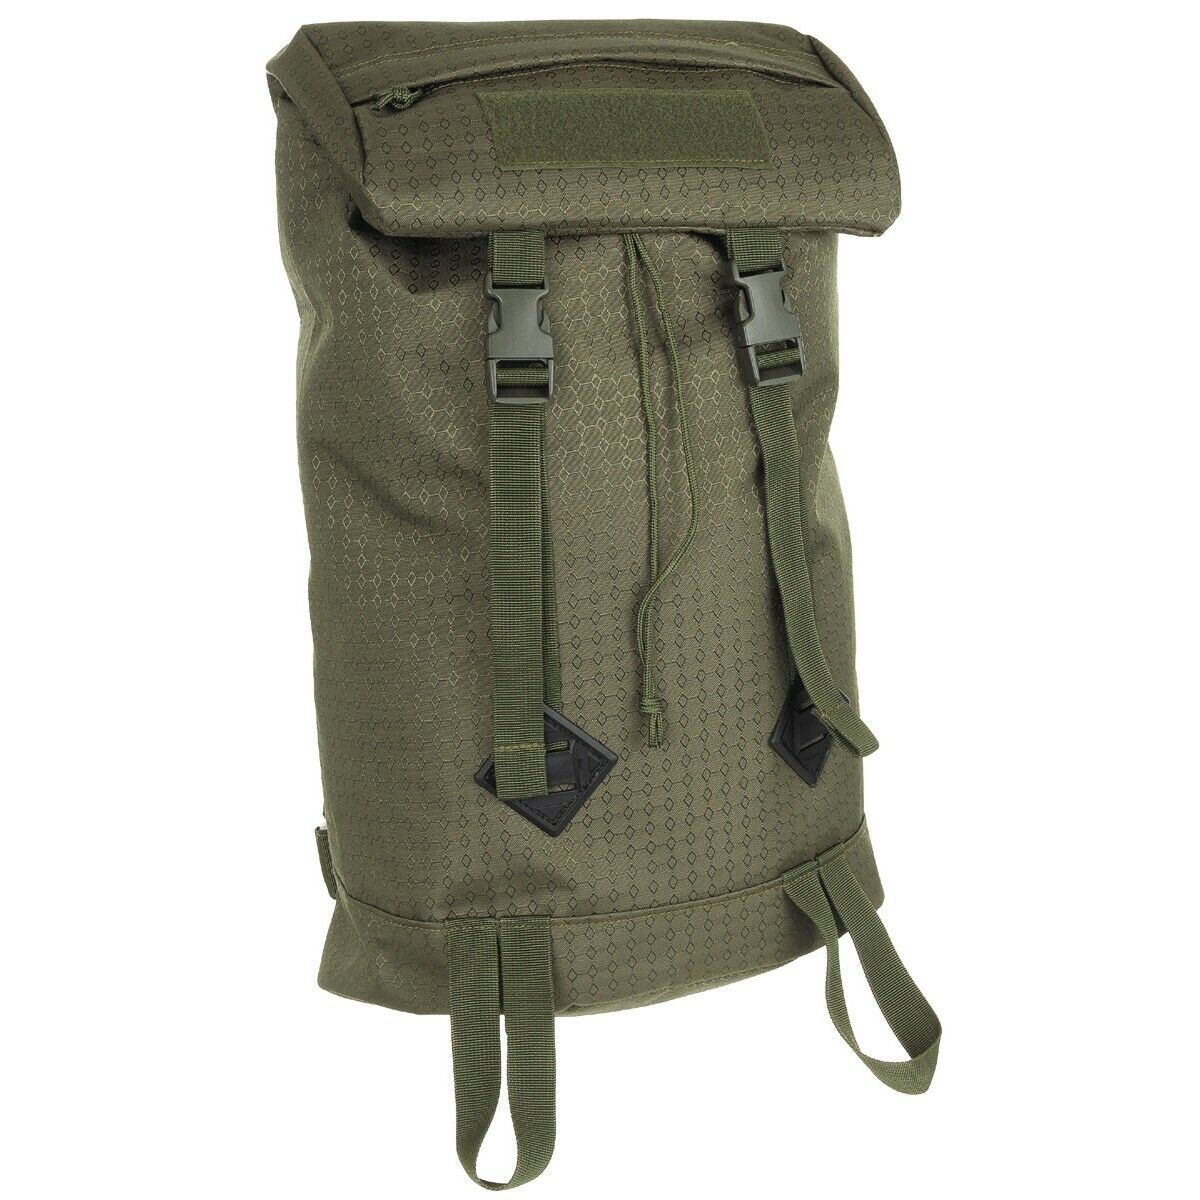 MFH® Stylish Outdoor City Backpack Bag "Bote" OctaTac 25L - Brand New - Green